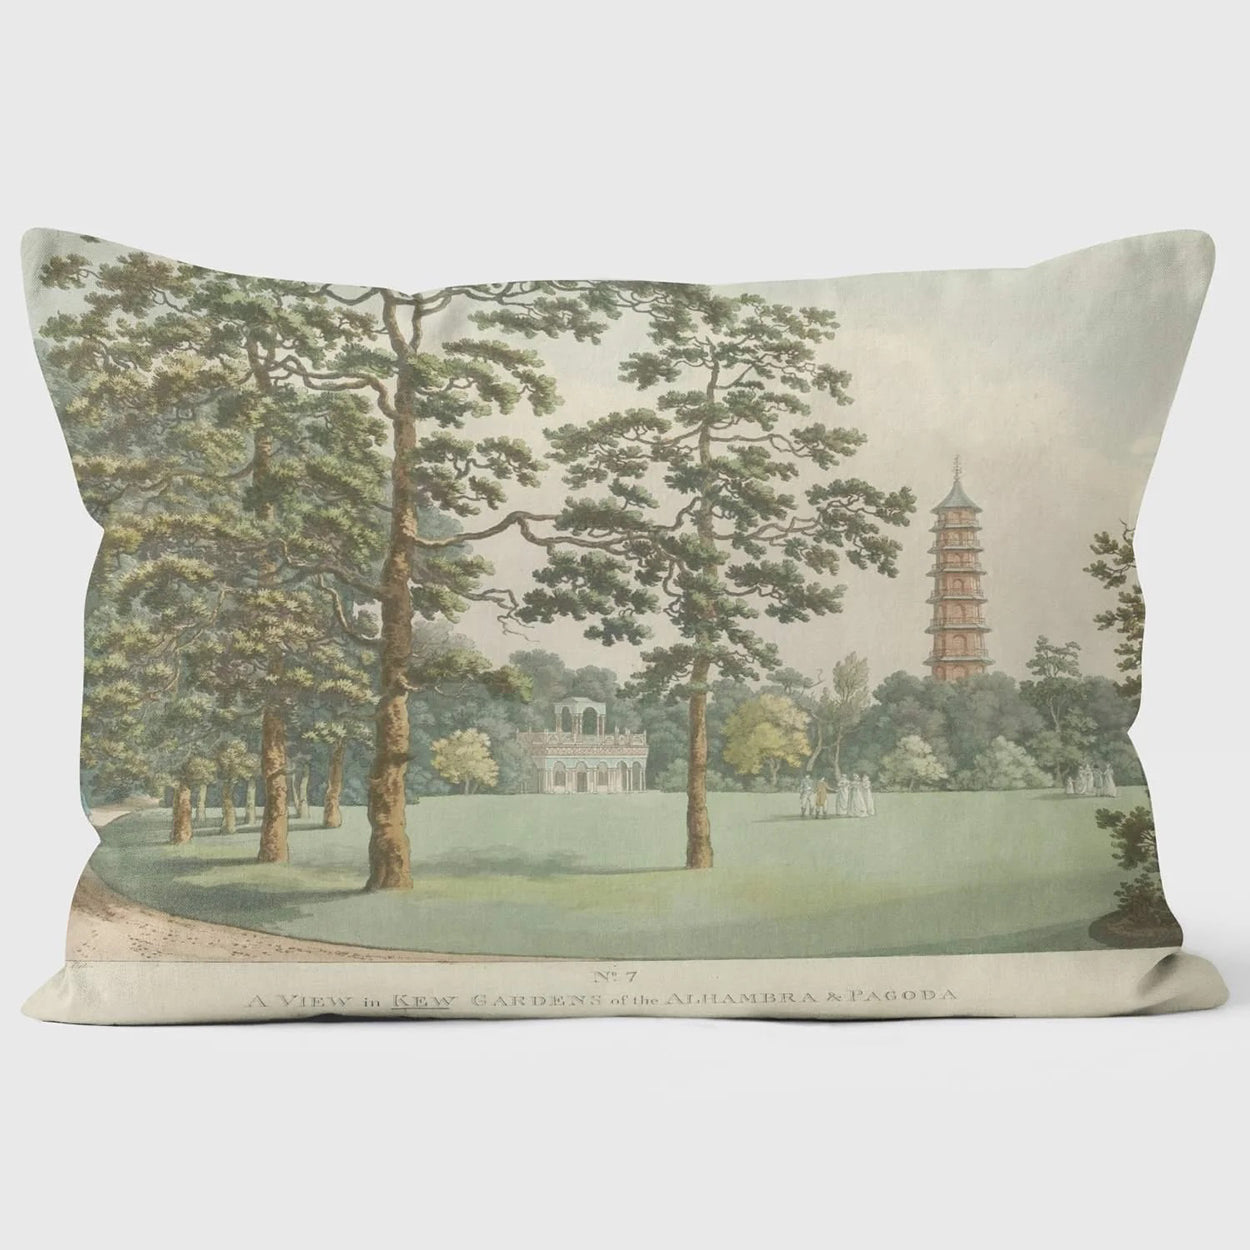 'A View in Kew Gardens of the Alhambra and Pagoda' Cushion